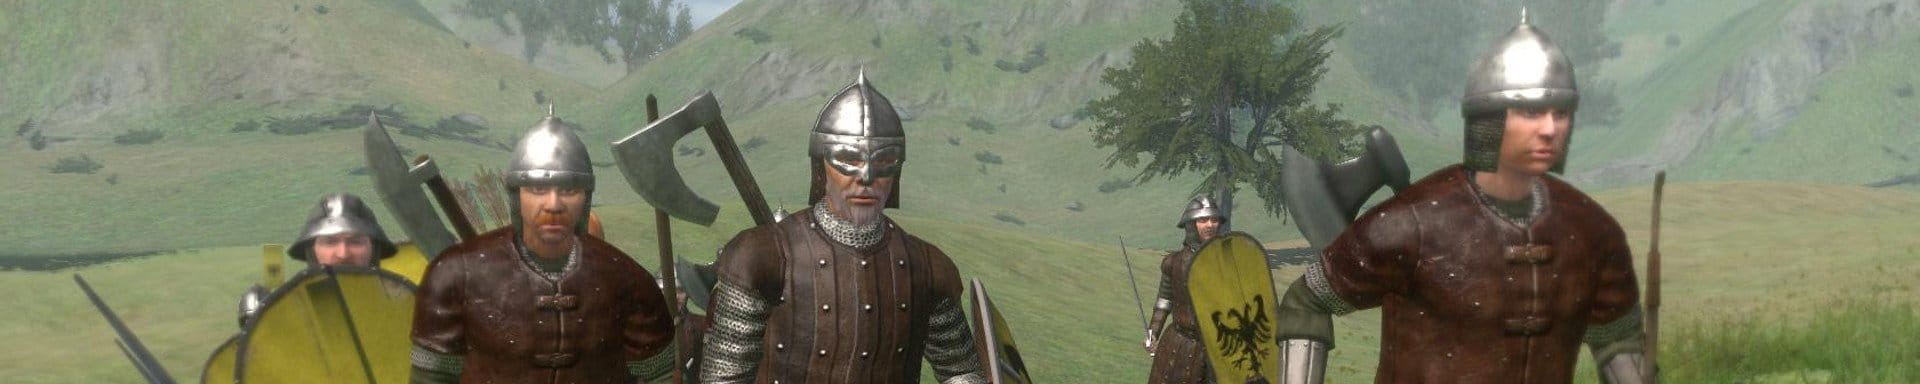 Mount & Blade II: Bannerlord Warband Soldiers